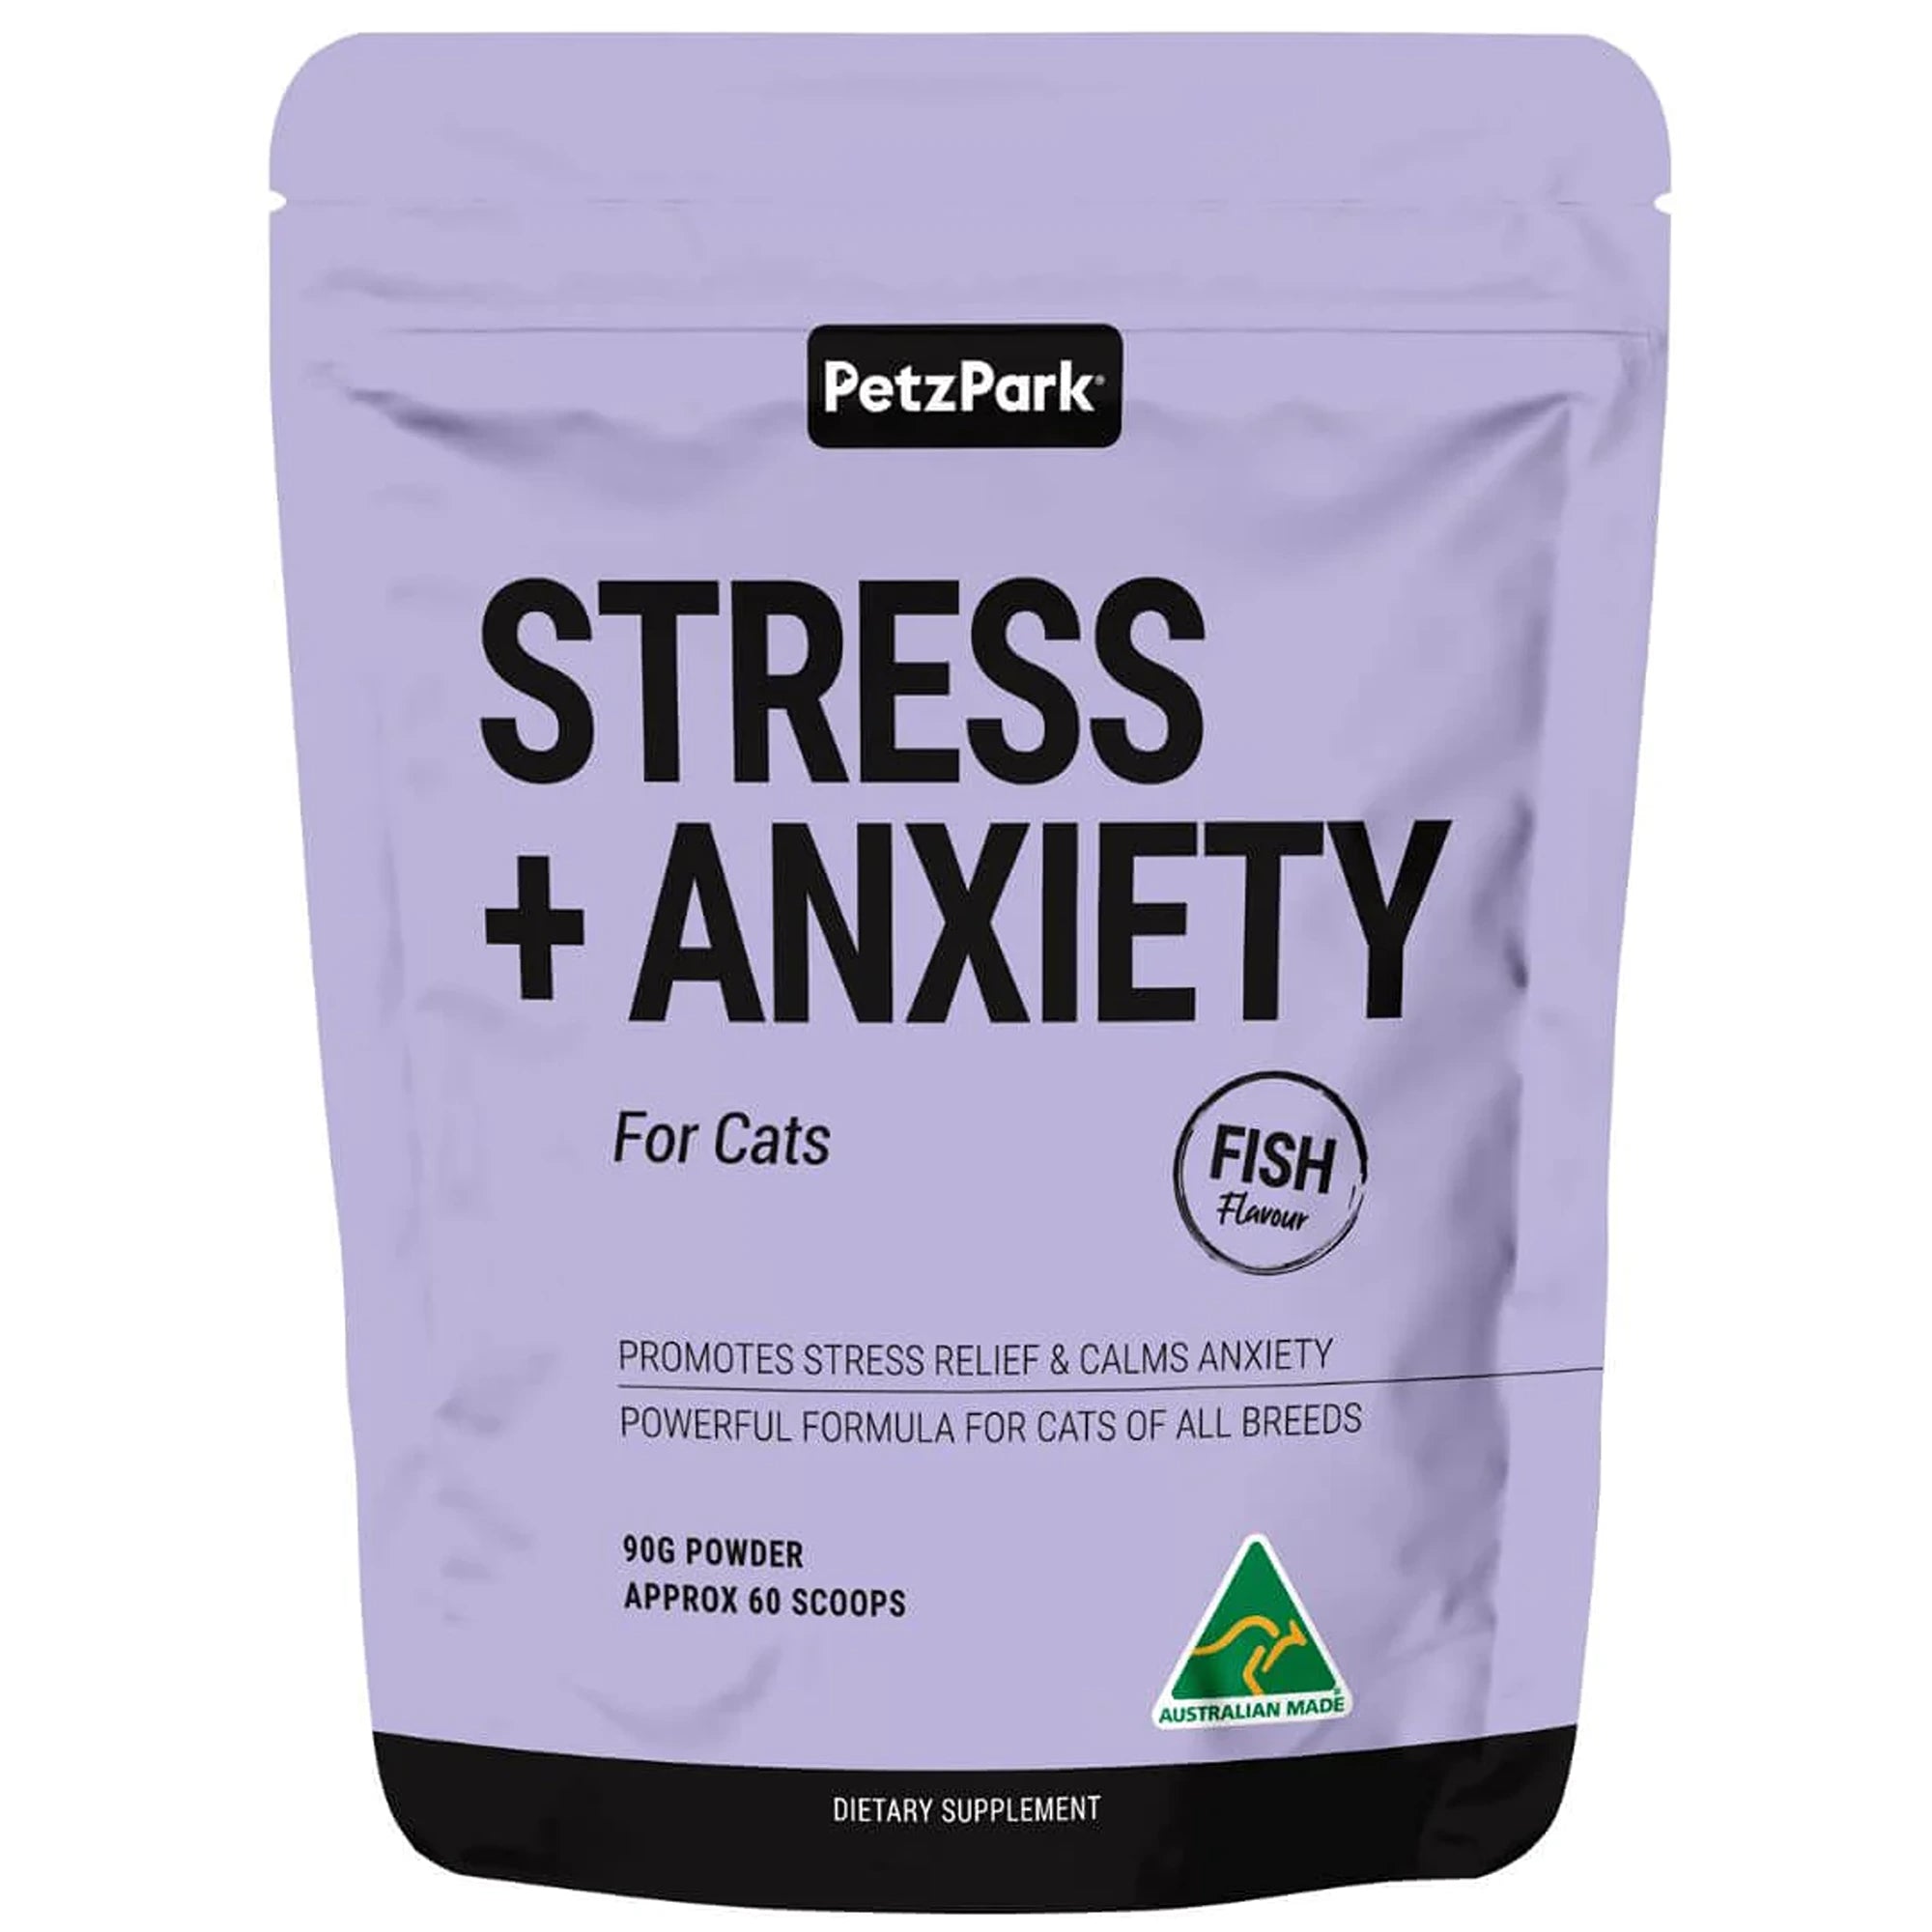 Petz Park Stress + Anxiety for Cats